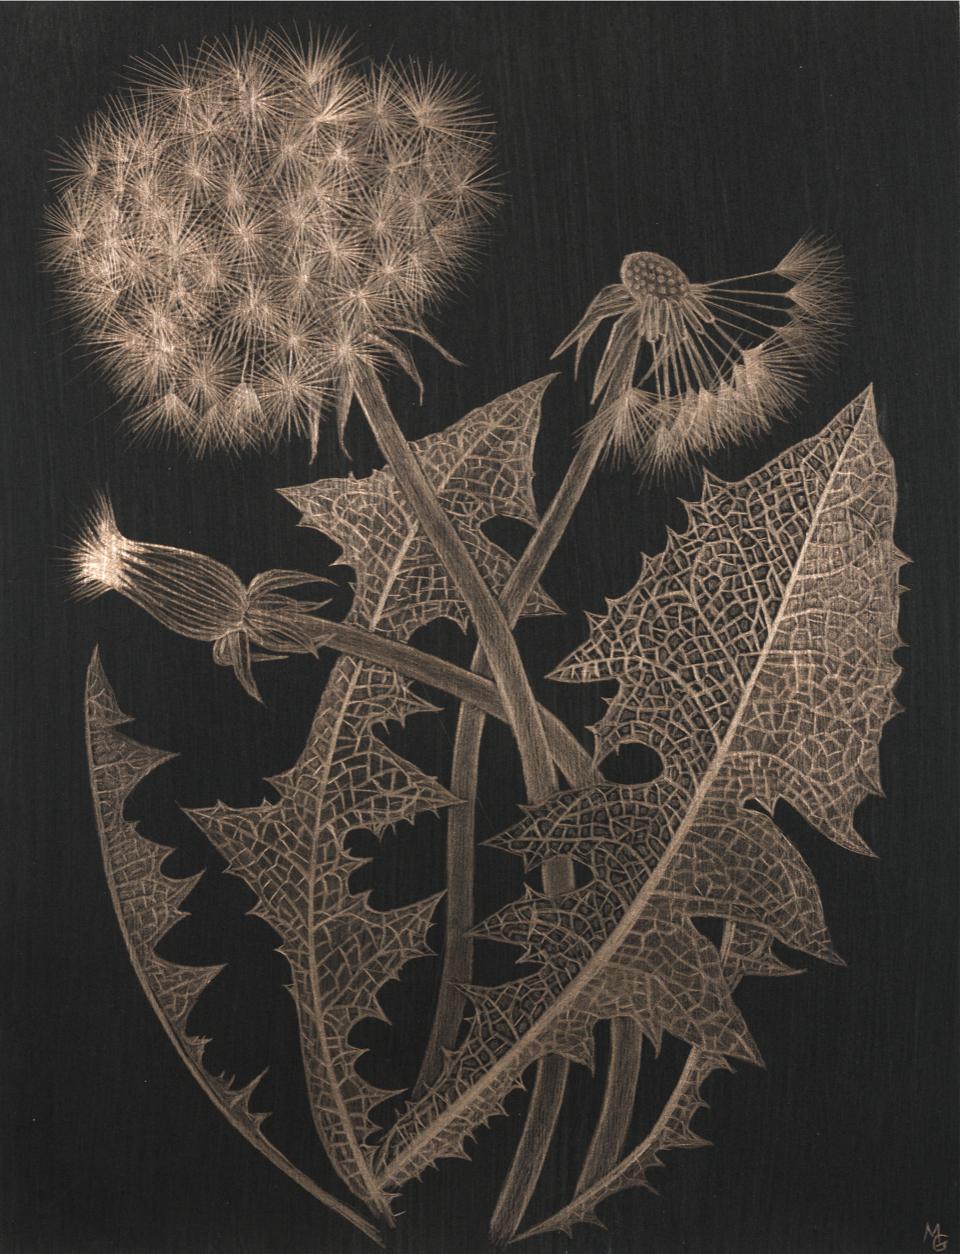 Margot Glass uses a stylus to carefully apply gold particles to her prepared paper. The medium is just as fragile and capricious as the dandelion seeds themselves: “the surface is not forgiving so when I work on these, occasionally they get ruined